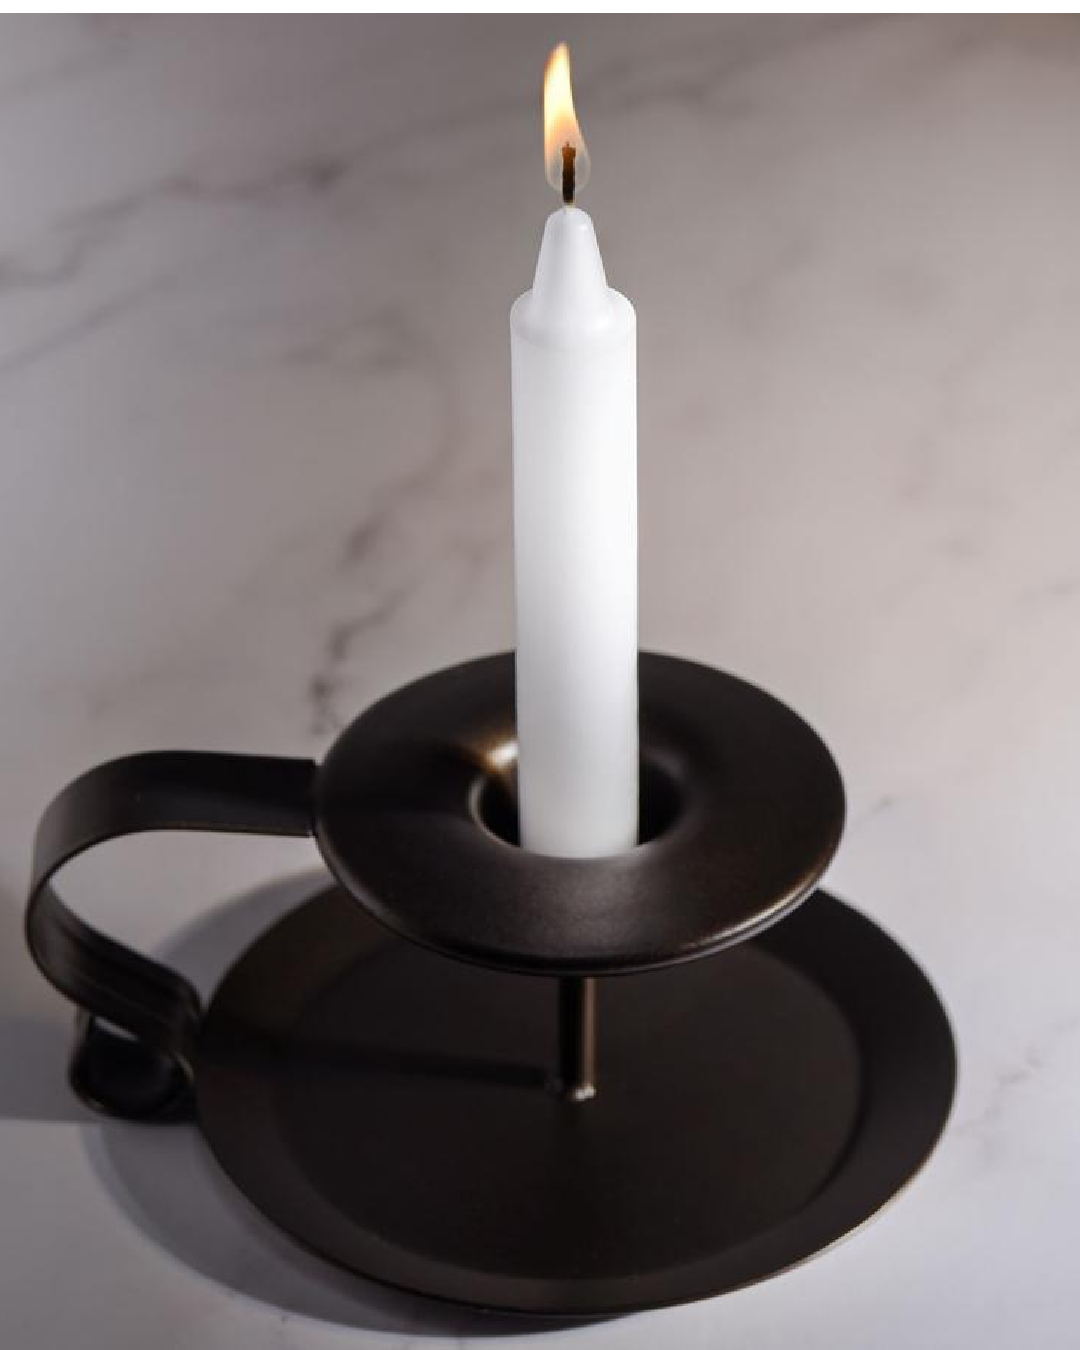 Lacire Drip Pillar Massage Candles - White  in black candle holder 